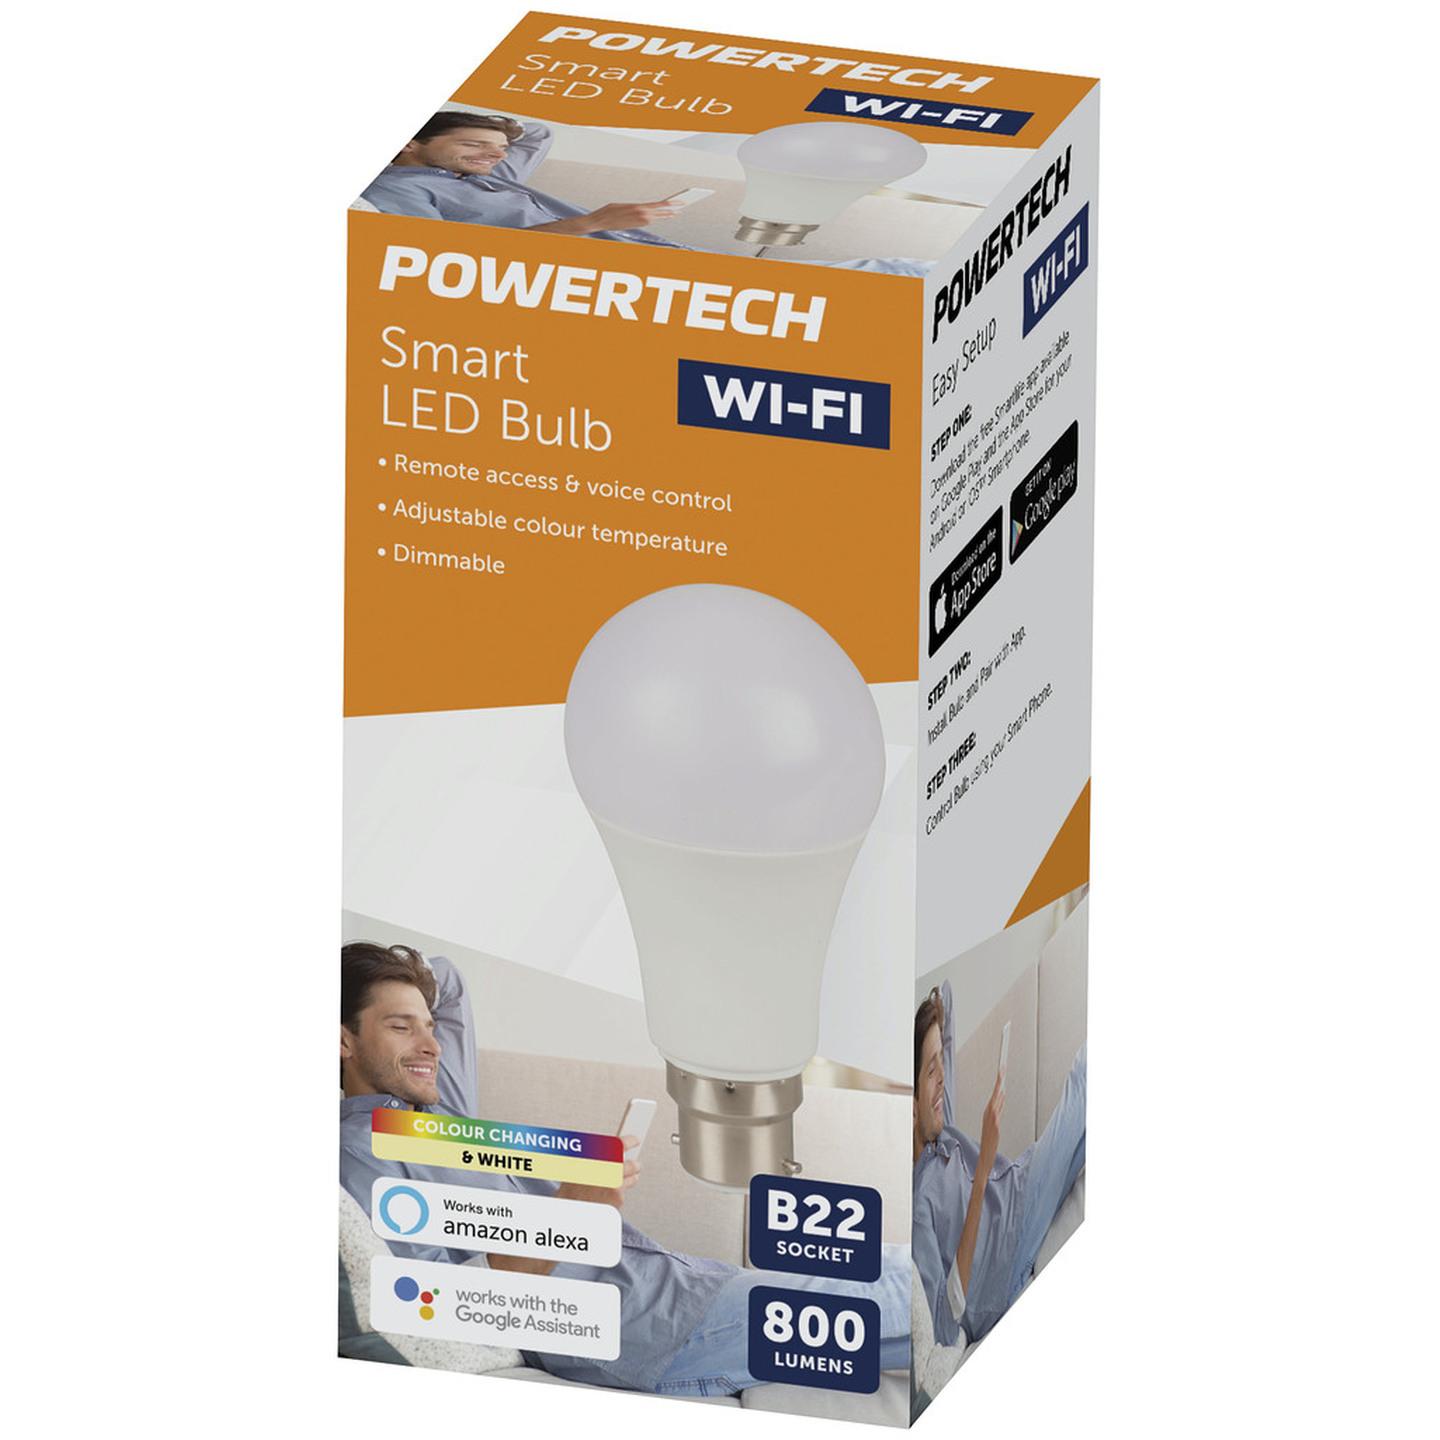 Smart Wi-Fi LED Bulb with Colour Change with Bayonet Light Fitting